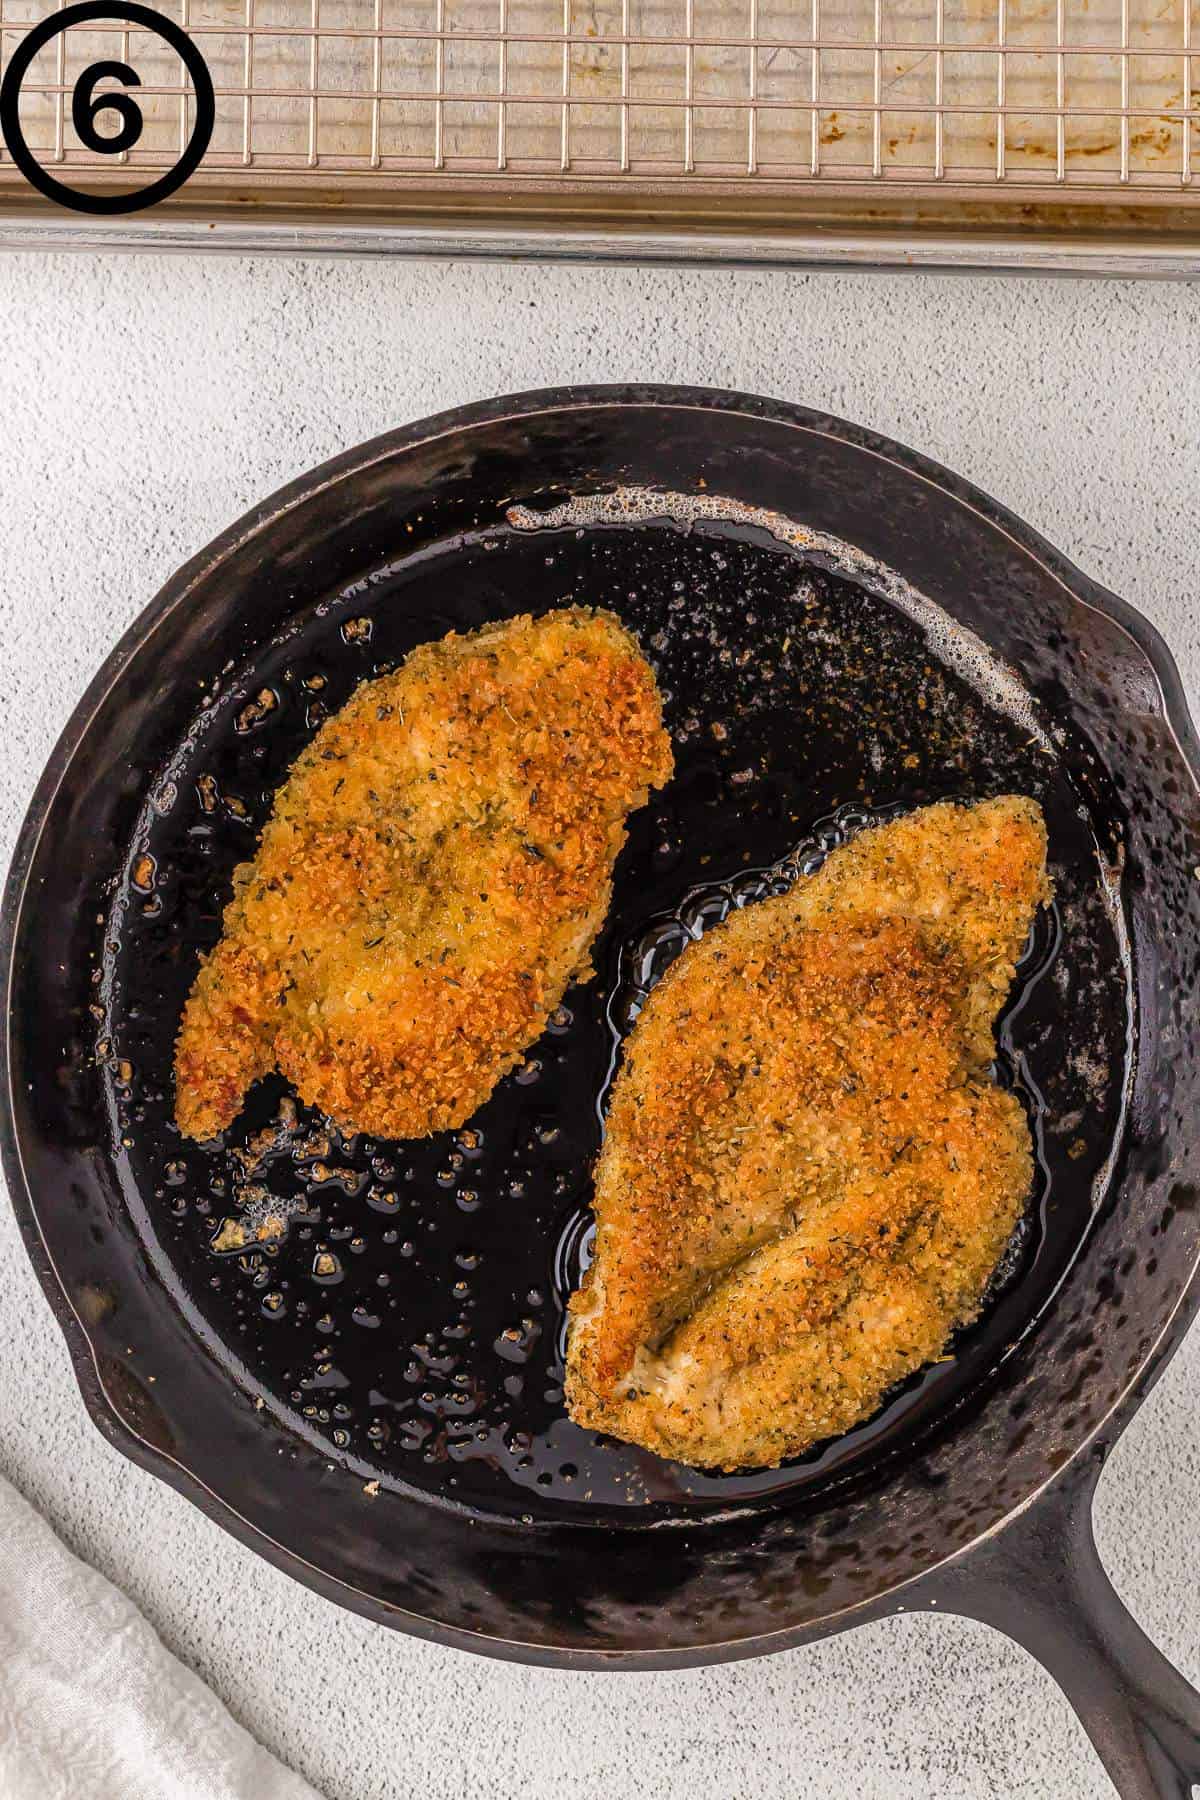 Shallow frying the chicken in a cast iron skillet.